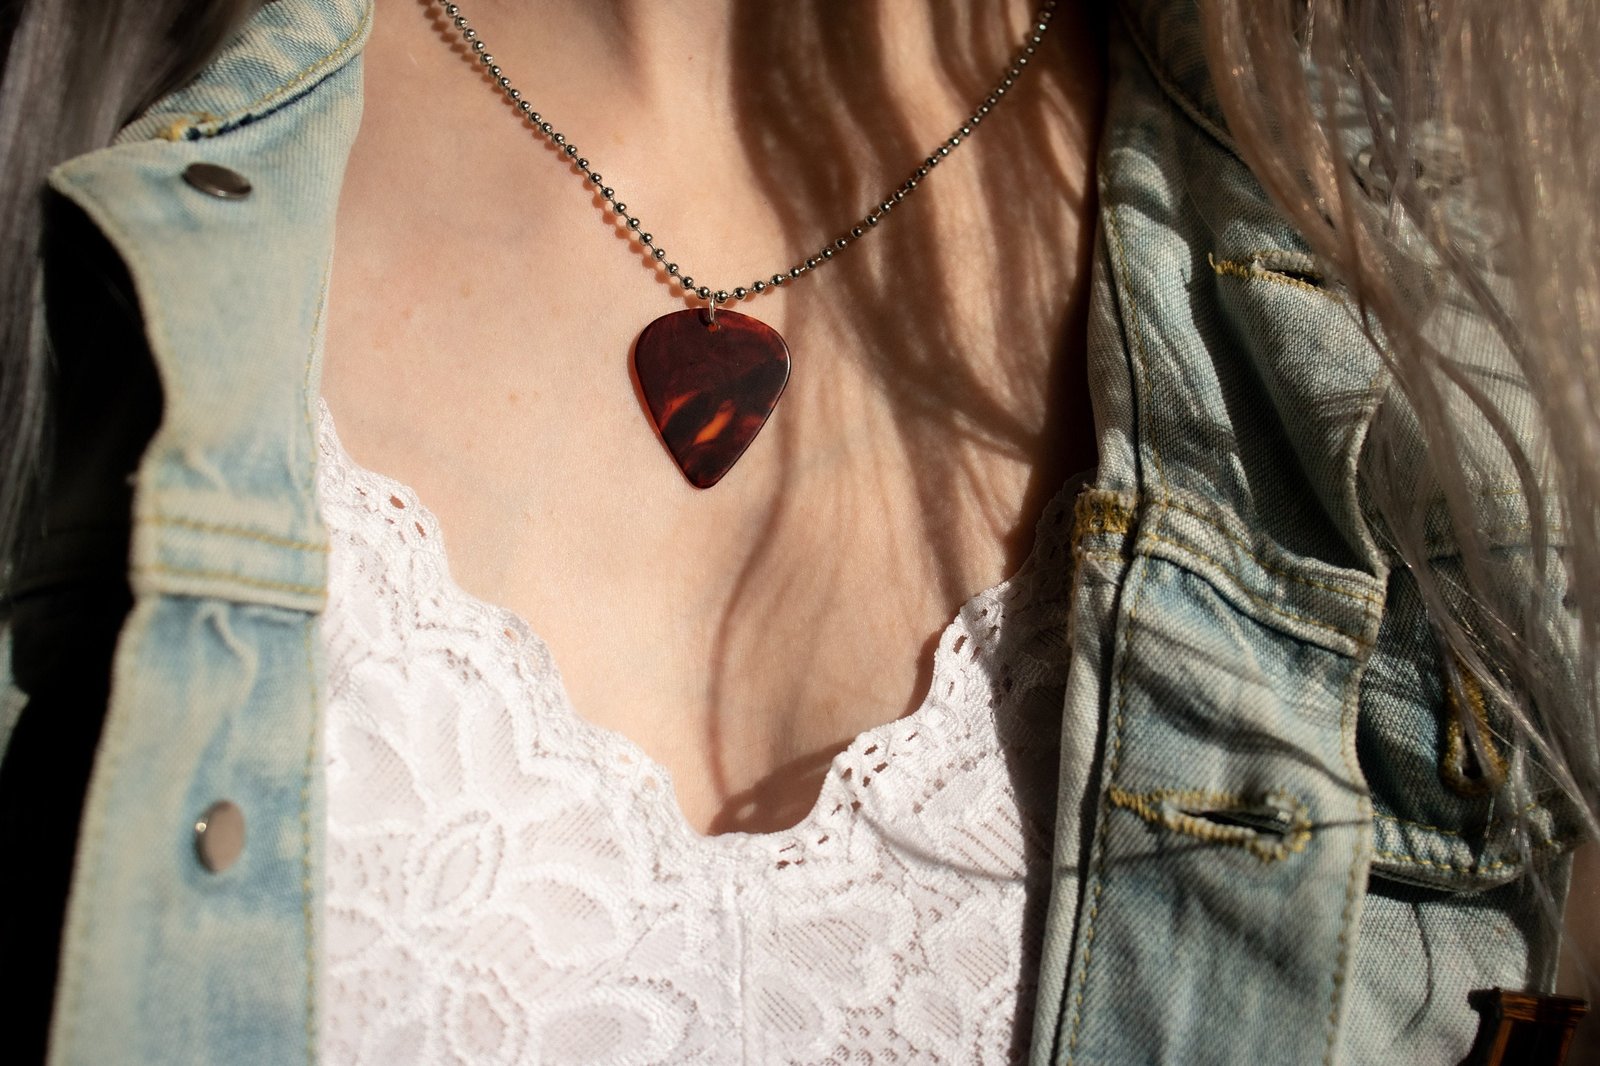 Stranger Hellfire Club Eddie Munson Guitar Pick Leather Necklace With  Pendant Perfect Gift For TV Drama Fans And Friends Z0417 From Lianwu09,  $21.29 | DHgate.Com